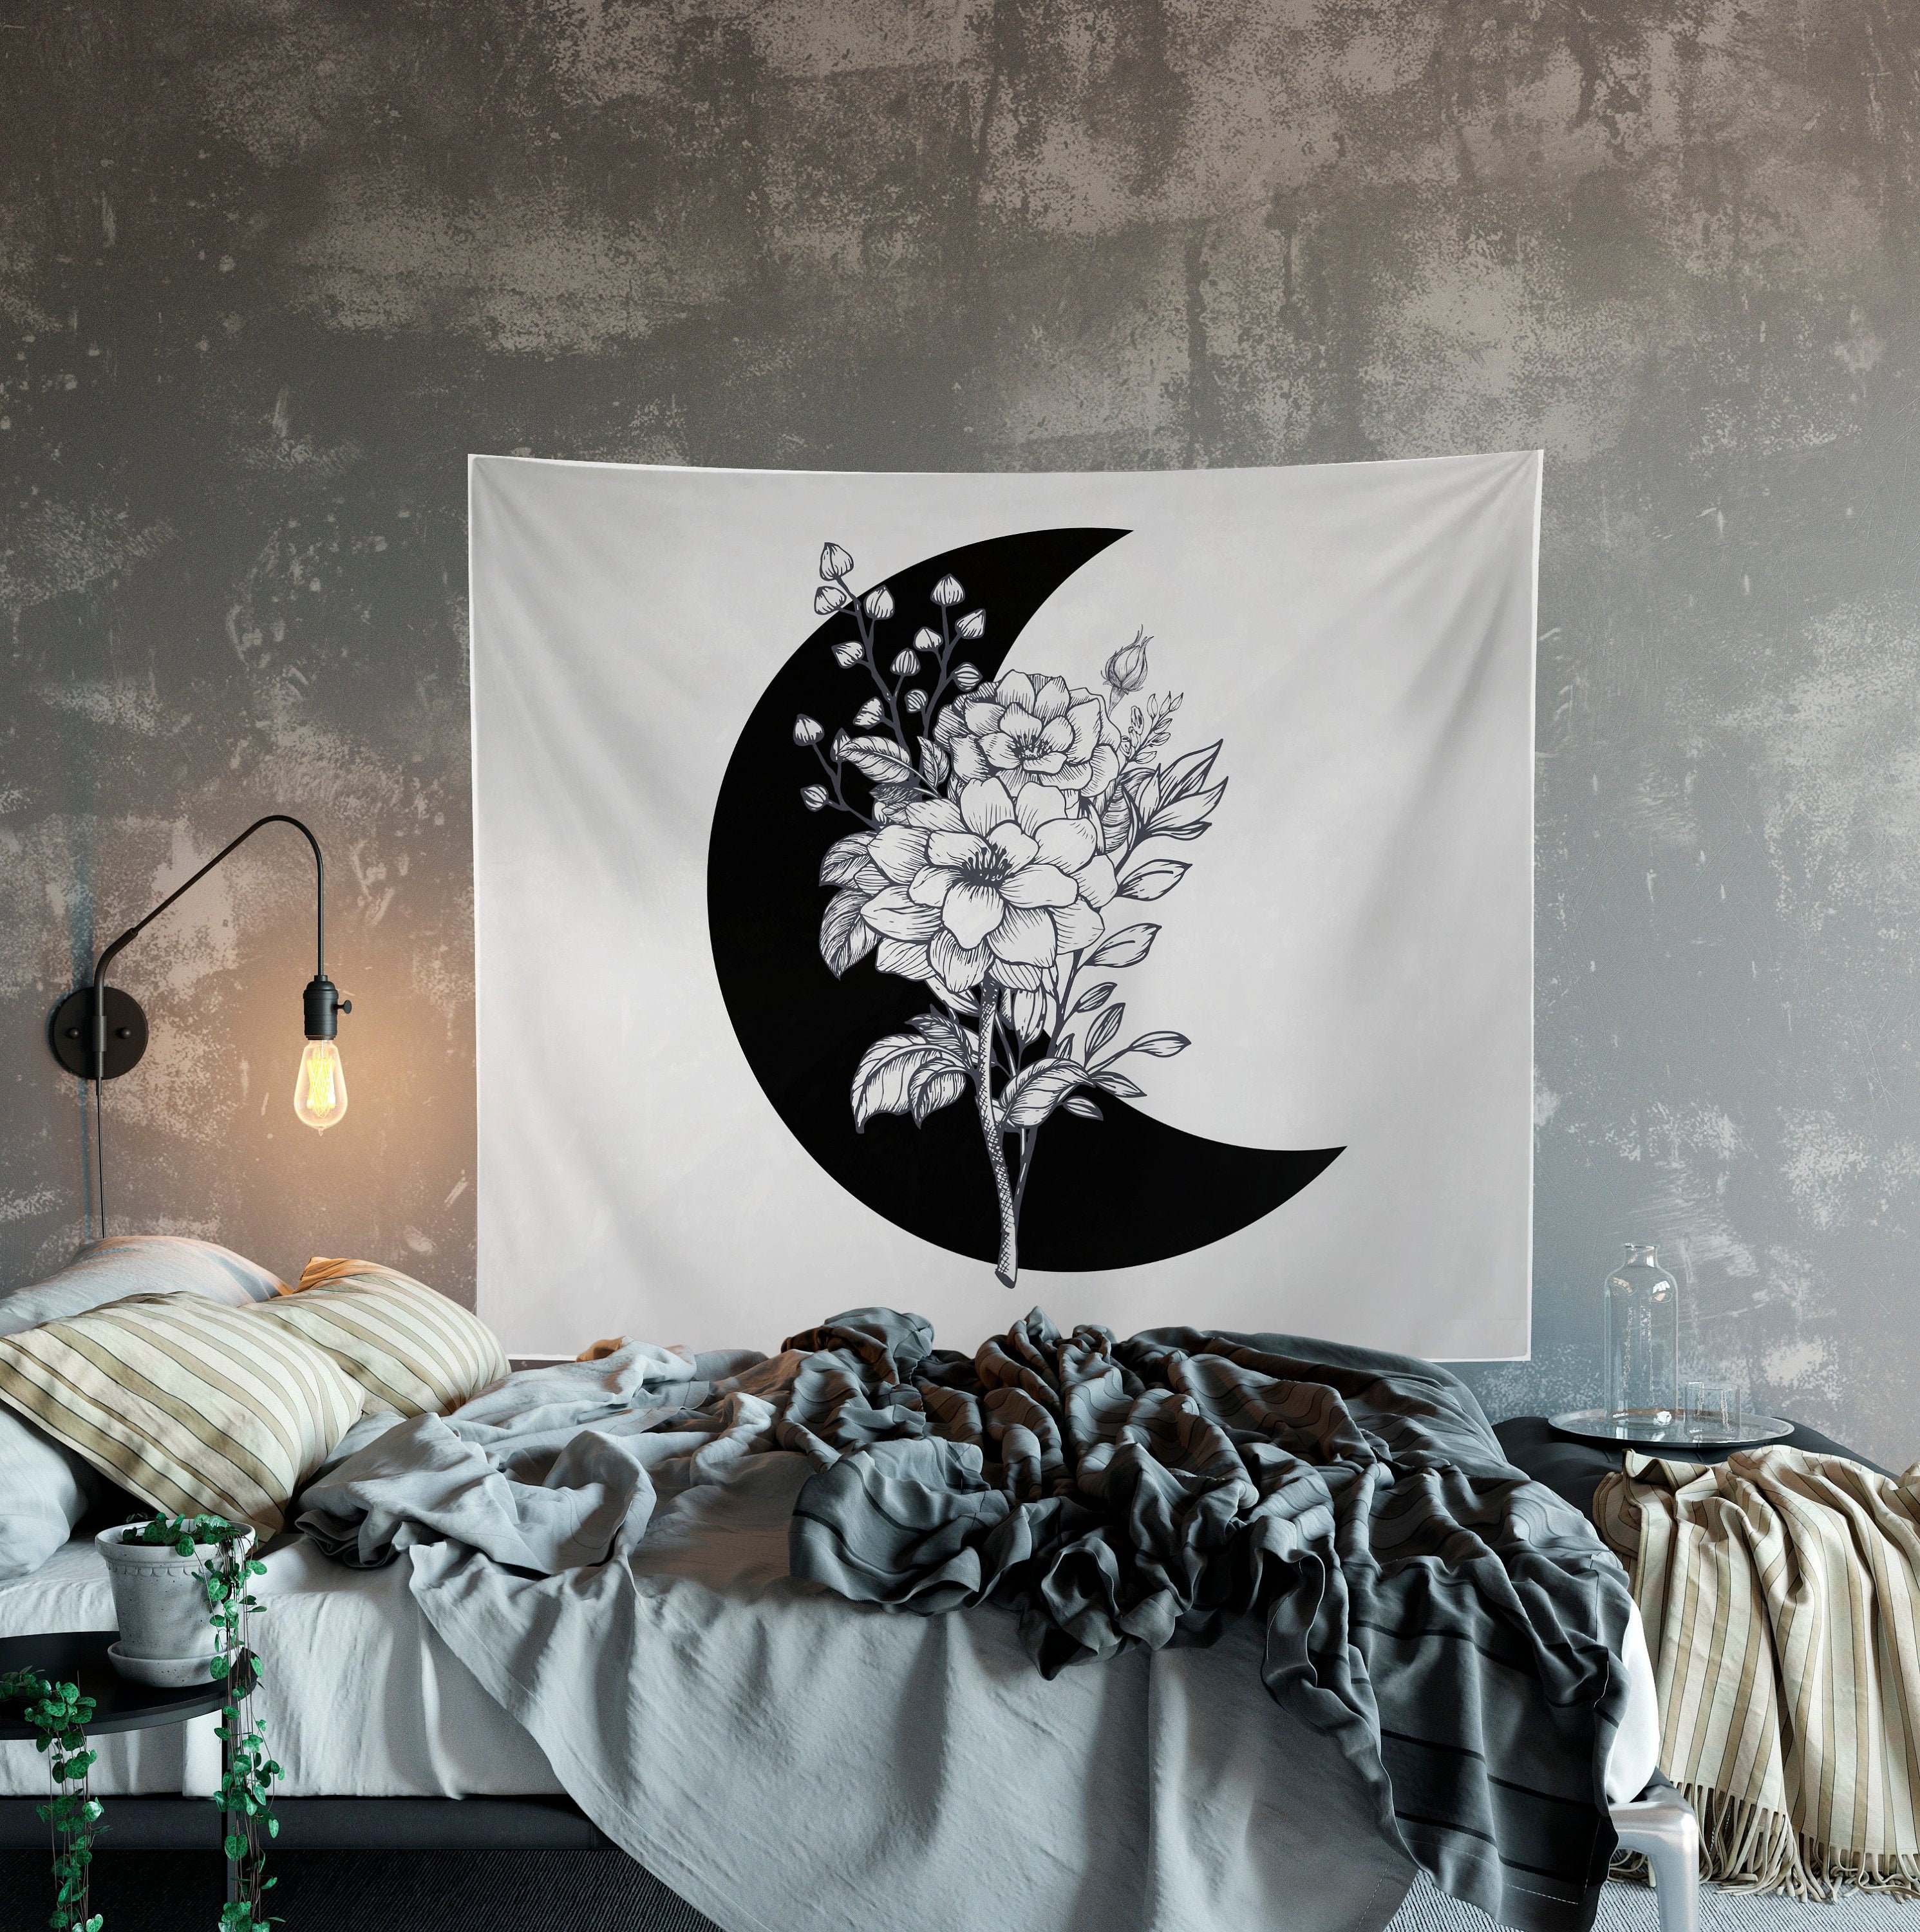 Moon Flowers Sketch Black and White Wall Hanging For | Etsy